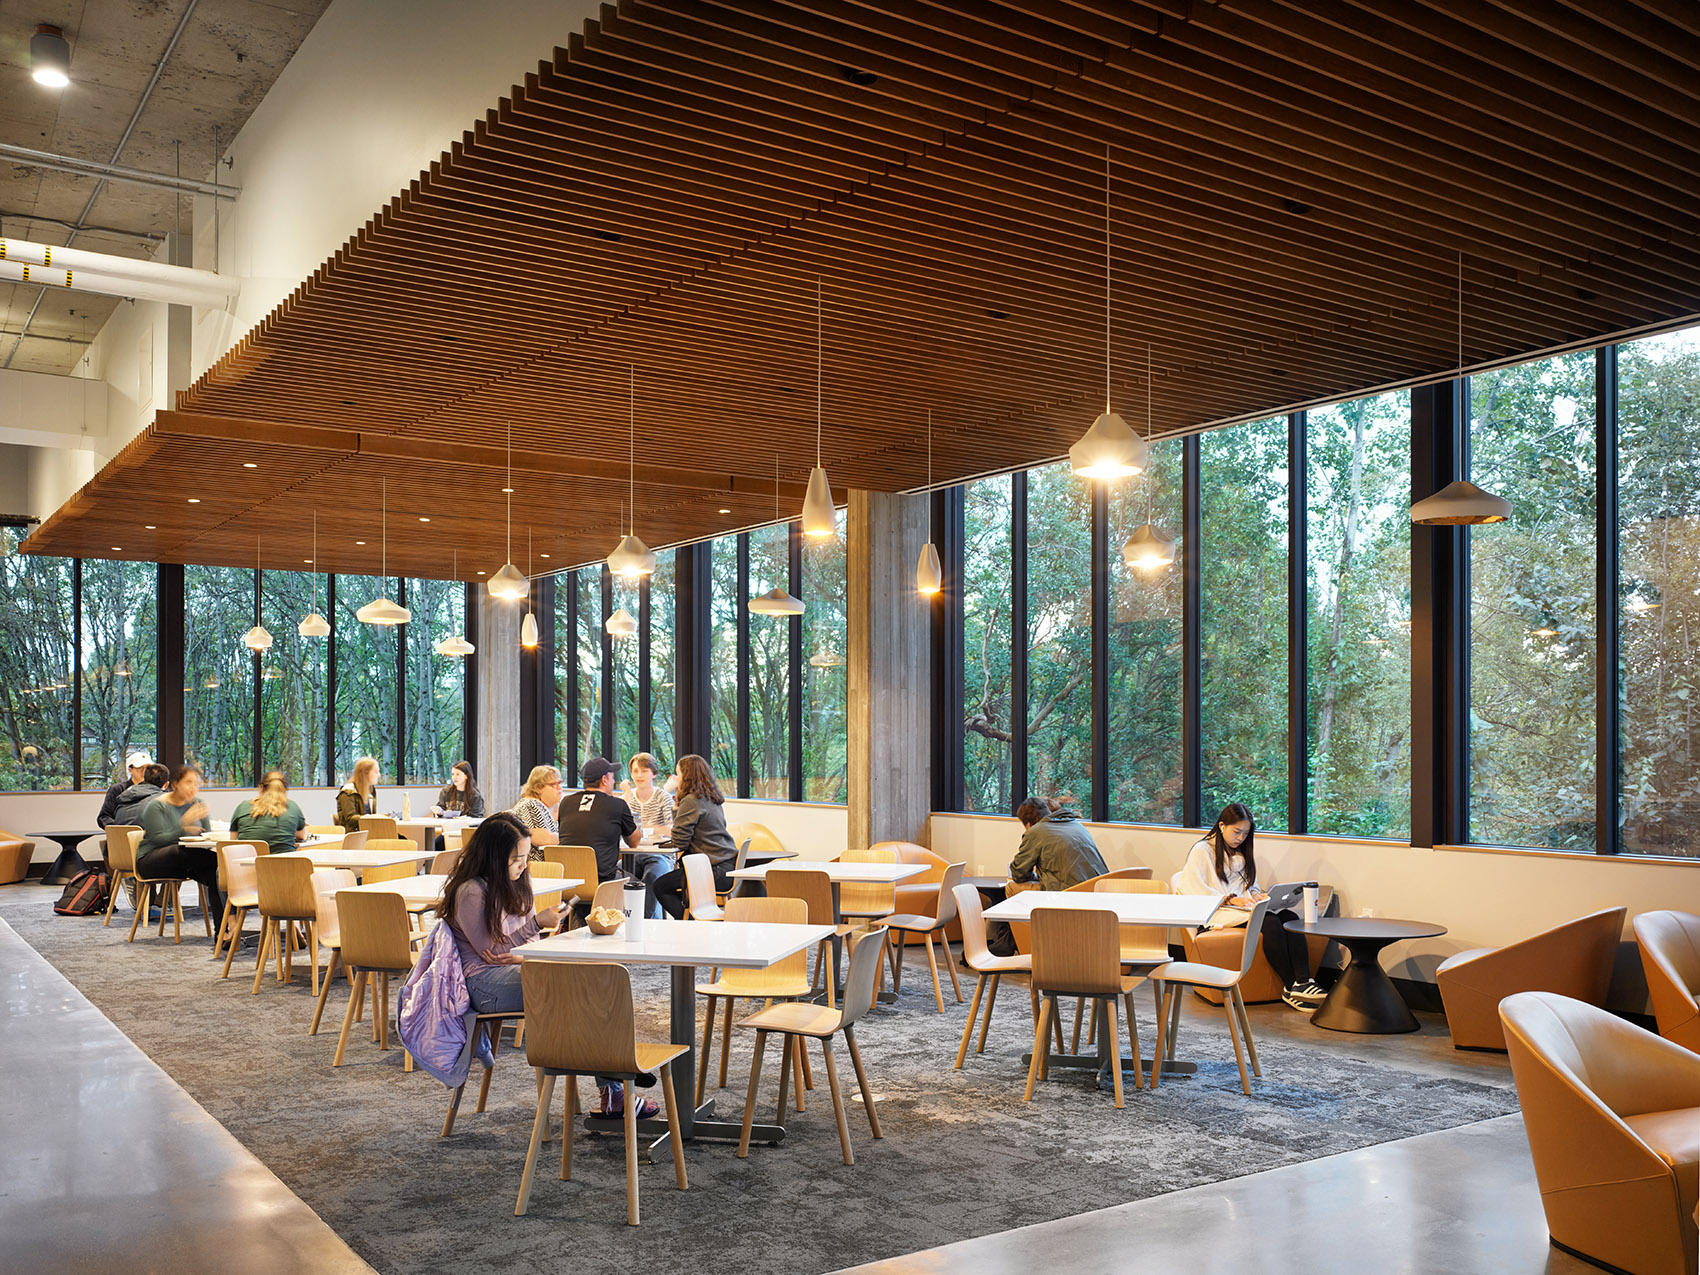 035 Center Table At North Campus Of University Of Washington By Graham Baba Architects 